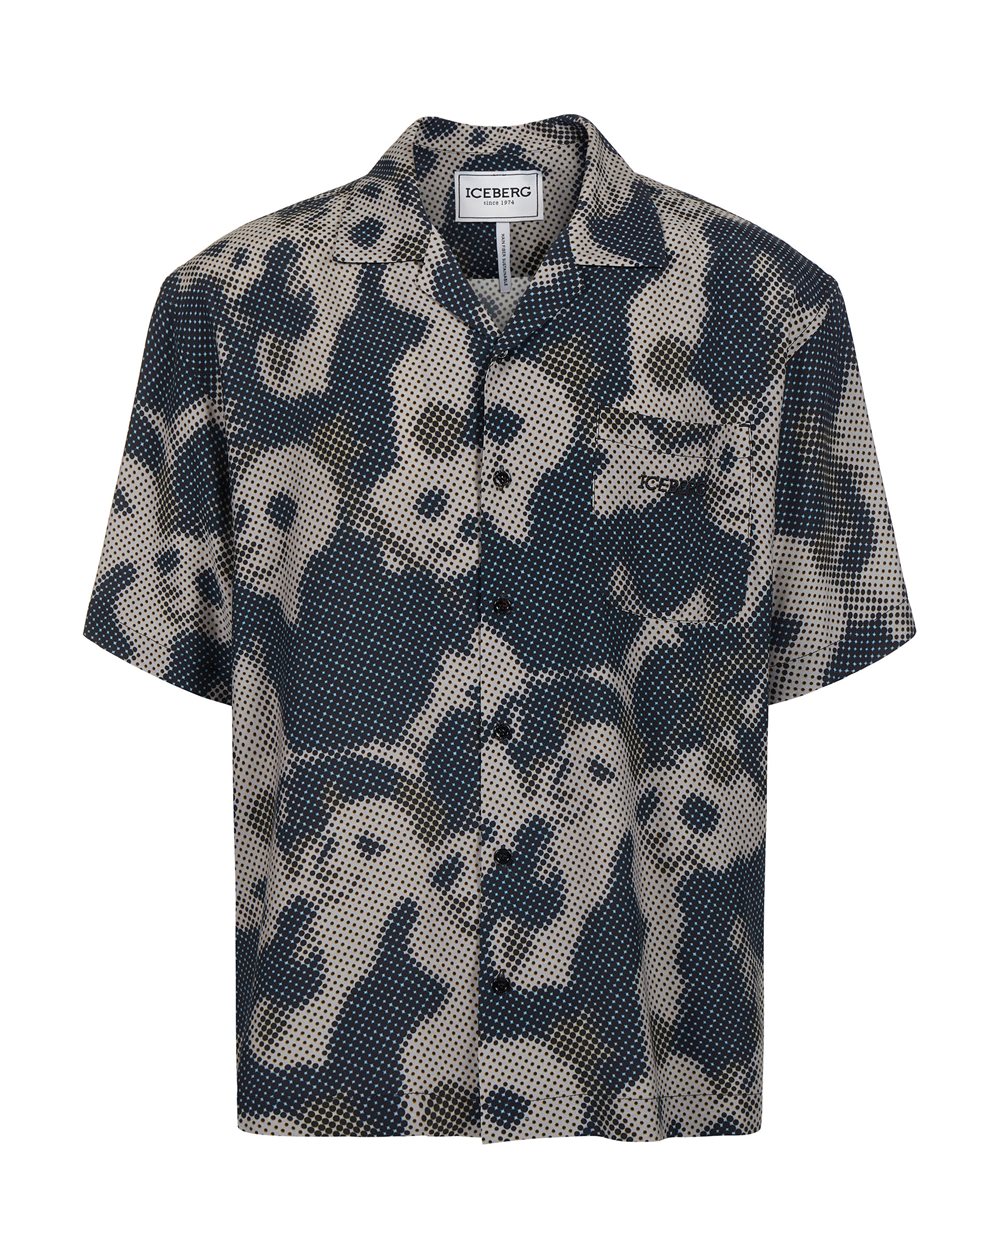 Shirt with pixel print and logo - shirts | Iceberg - Official Website